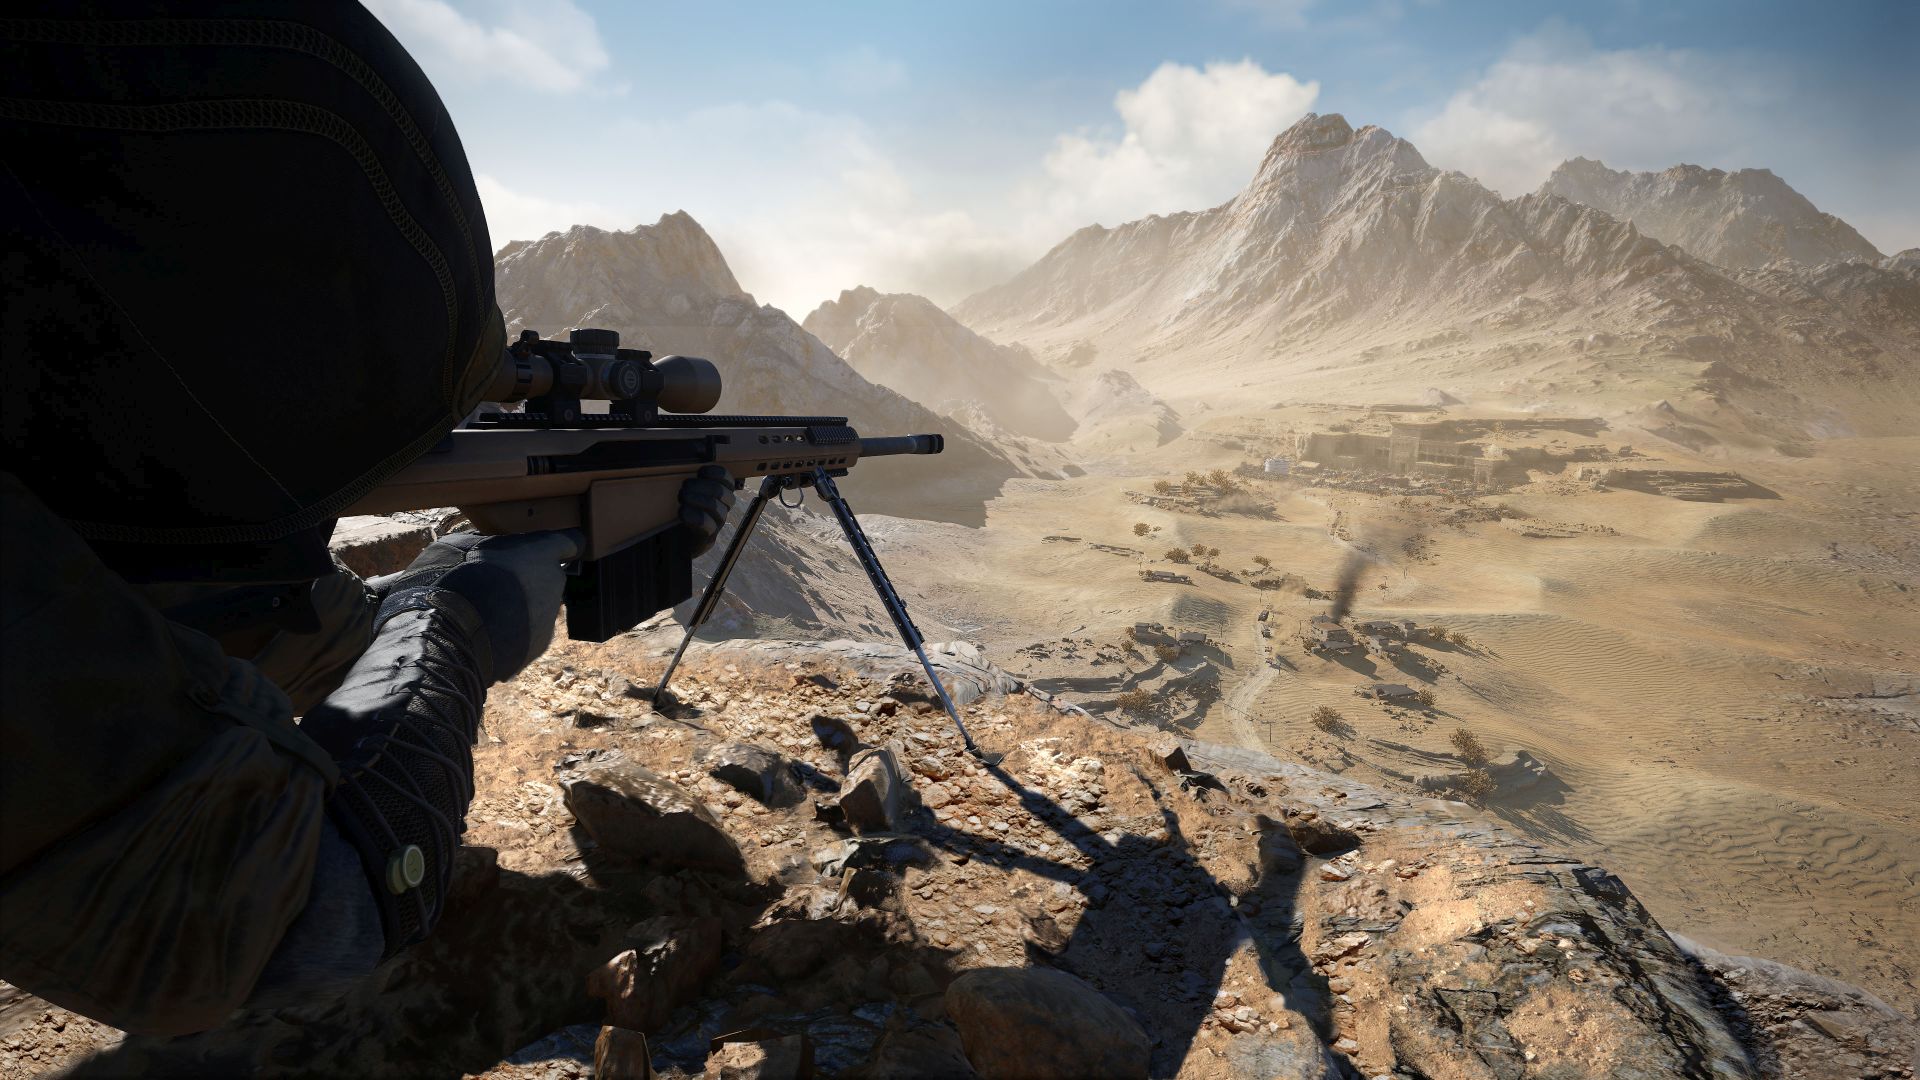 sniper ghost warrior review